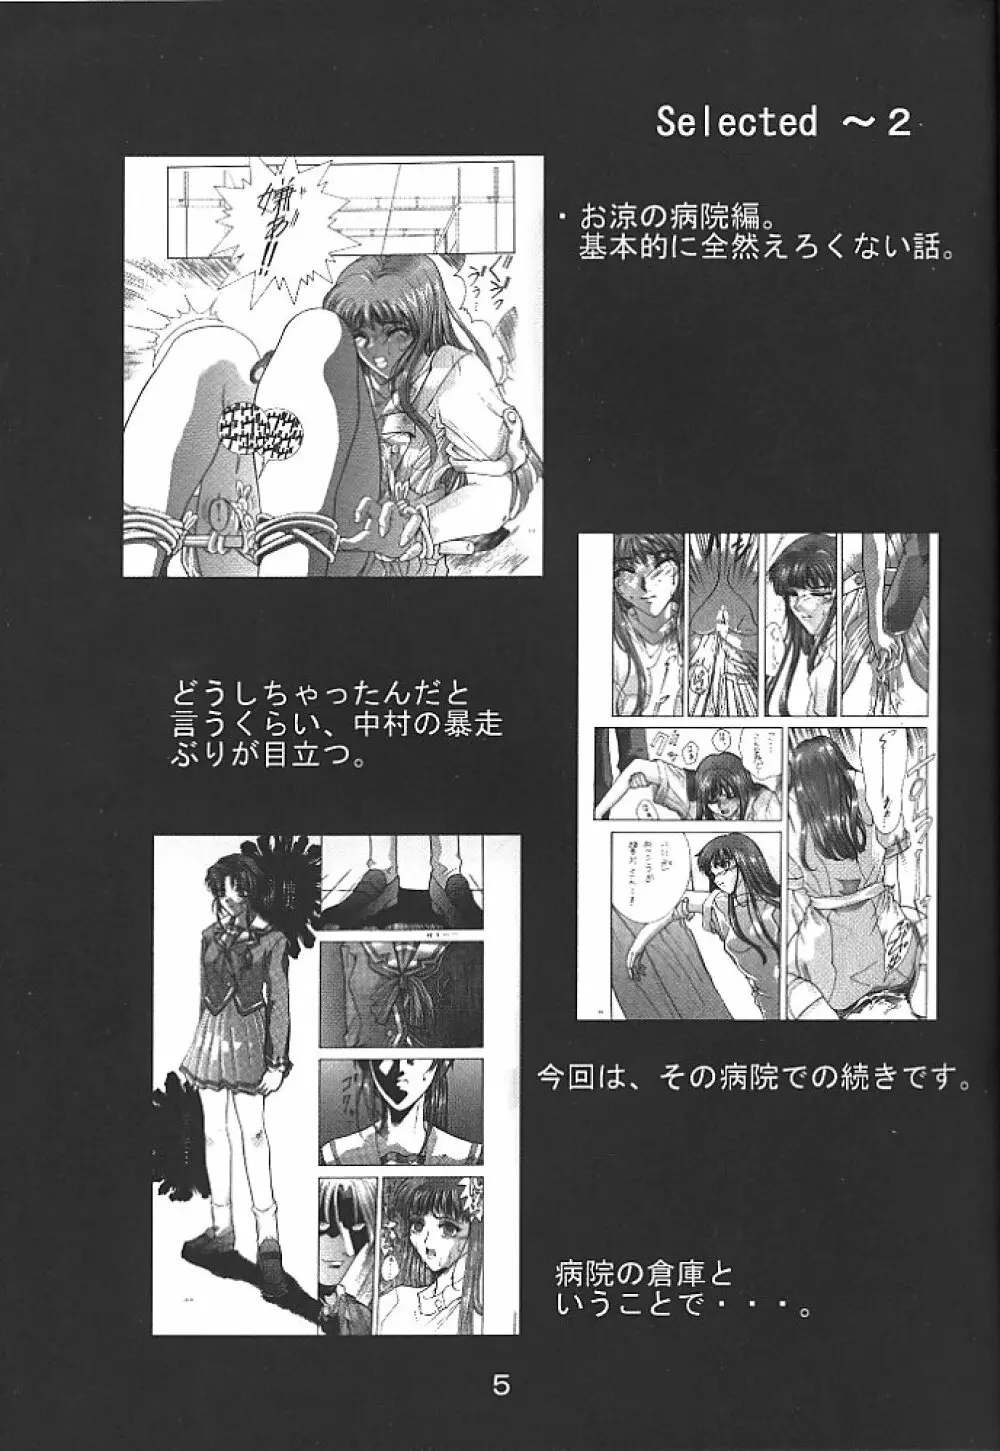 Selected Visual Girls 4 Page.4